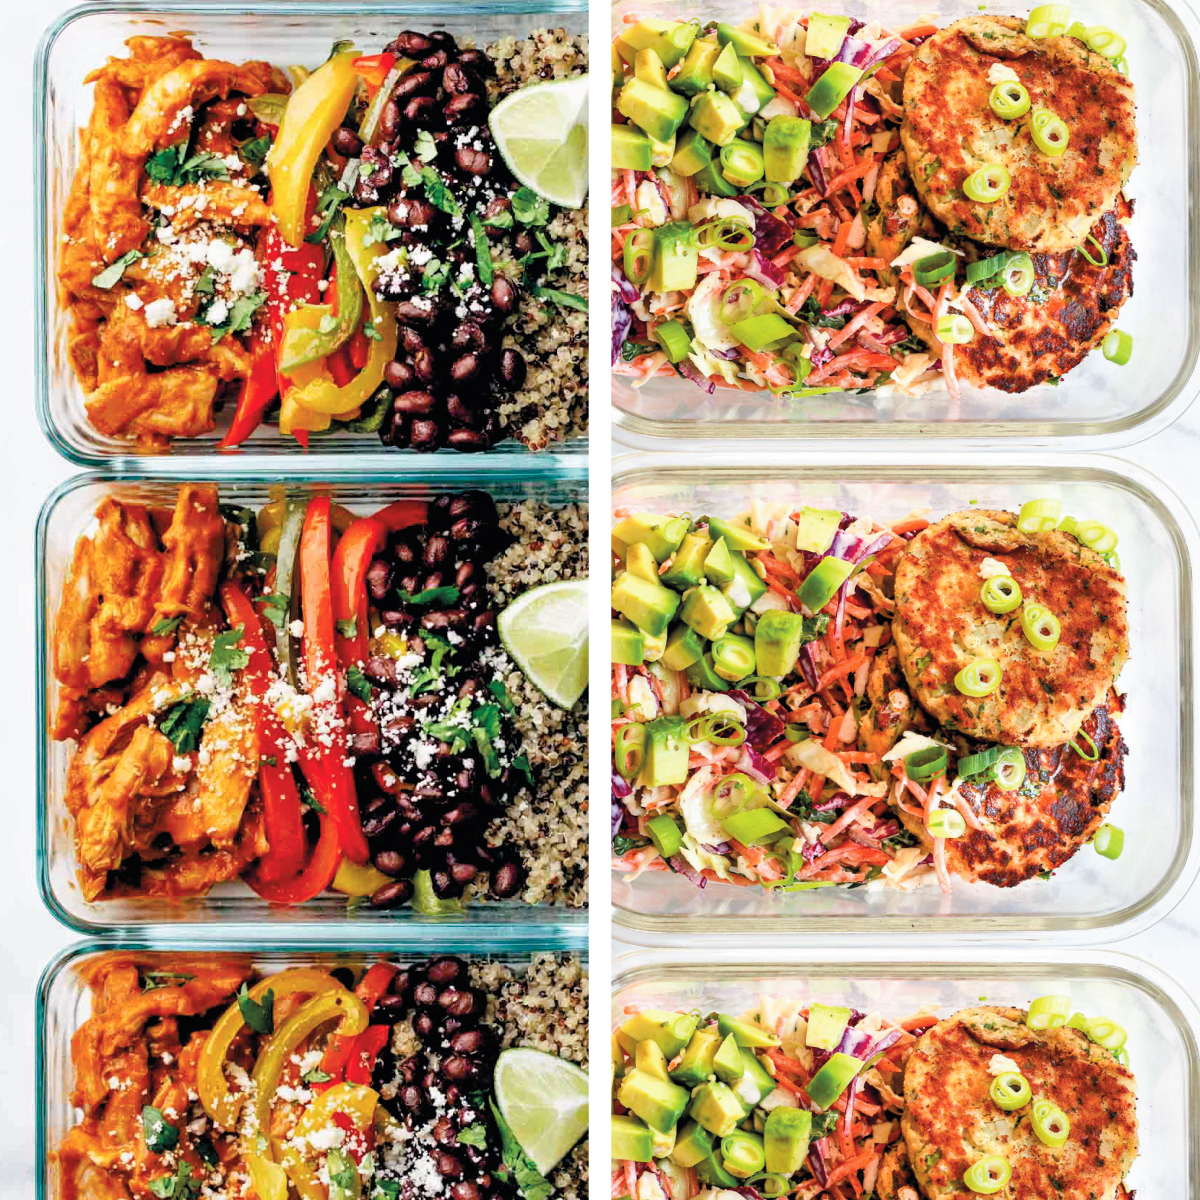 25 High Protein Meal Prep Recipes (Easy + Healthy) - Gathering Dreams